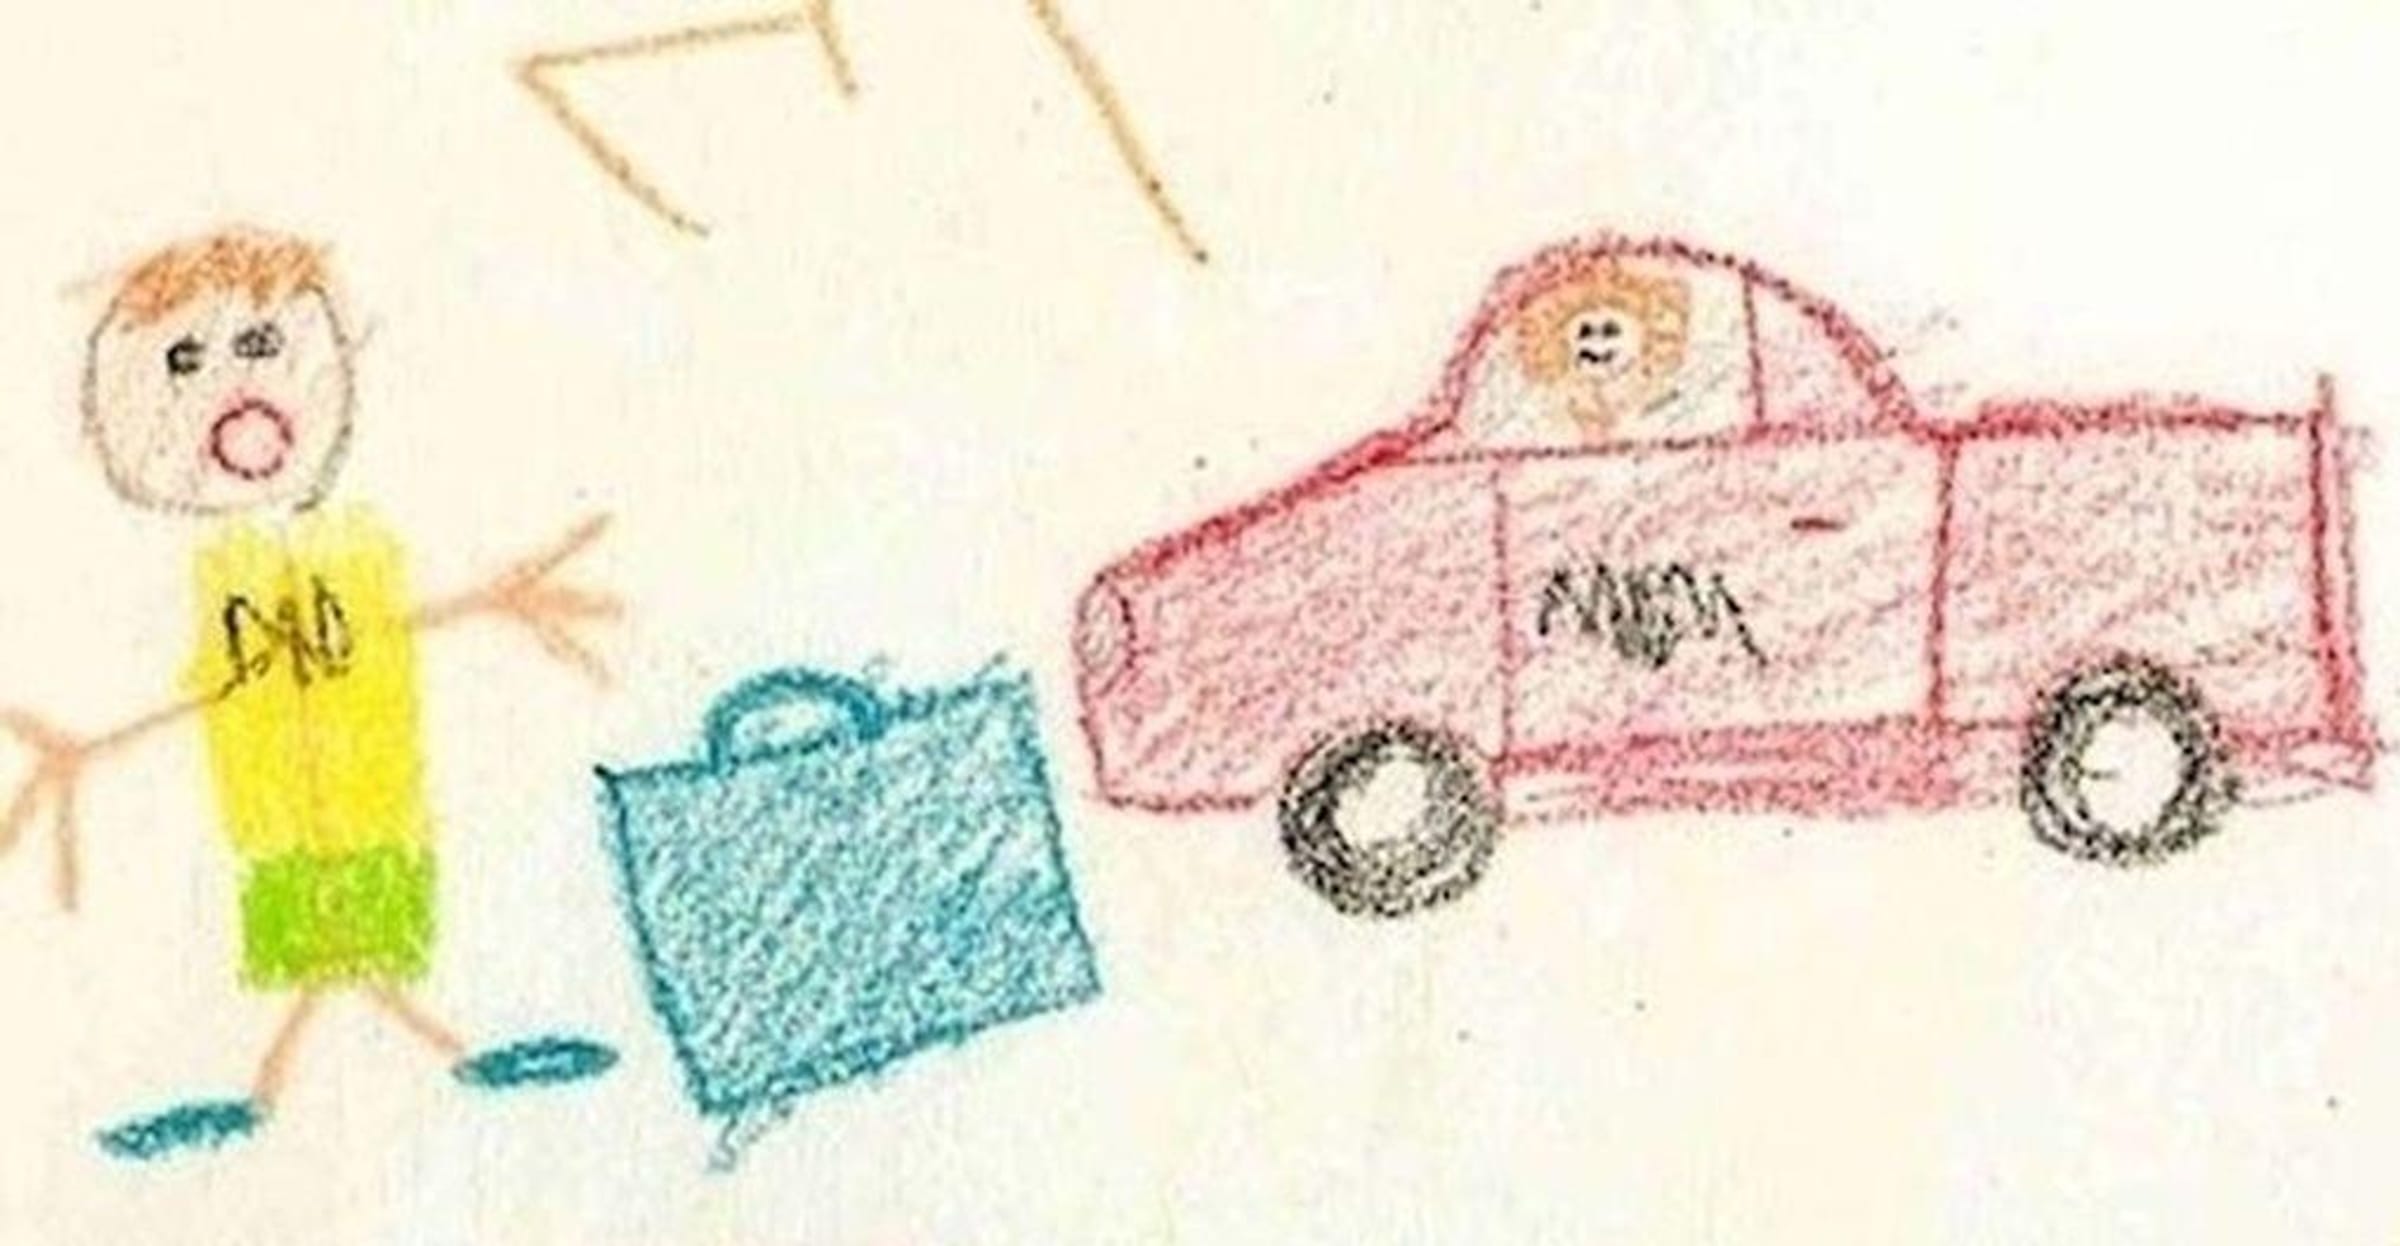 22 Funny Kids Drawings That Say a Lot About Their Parents